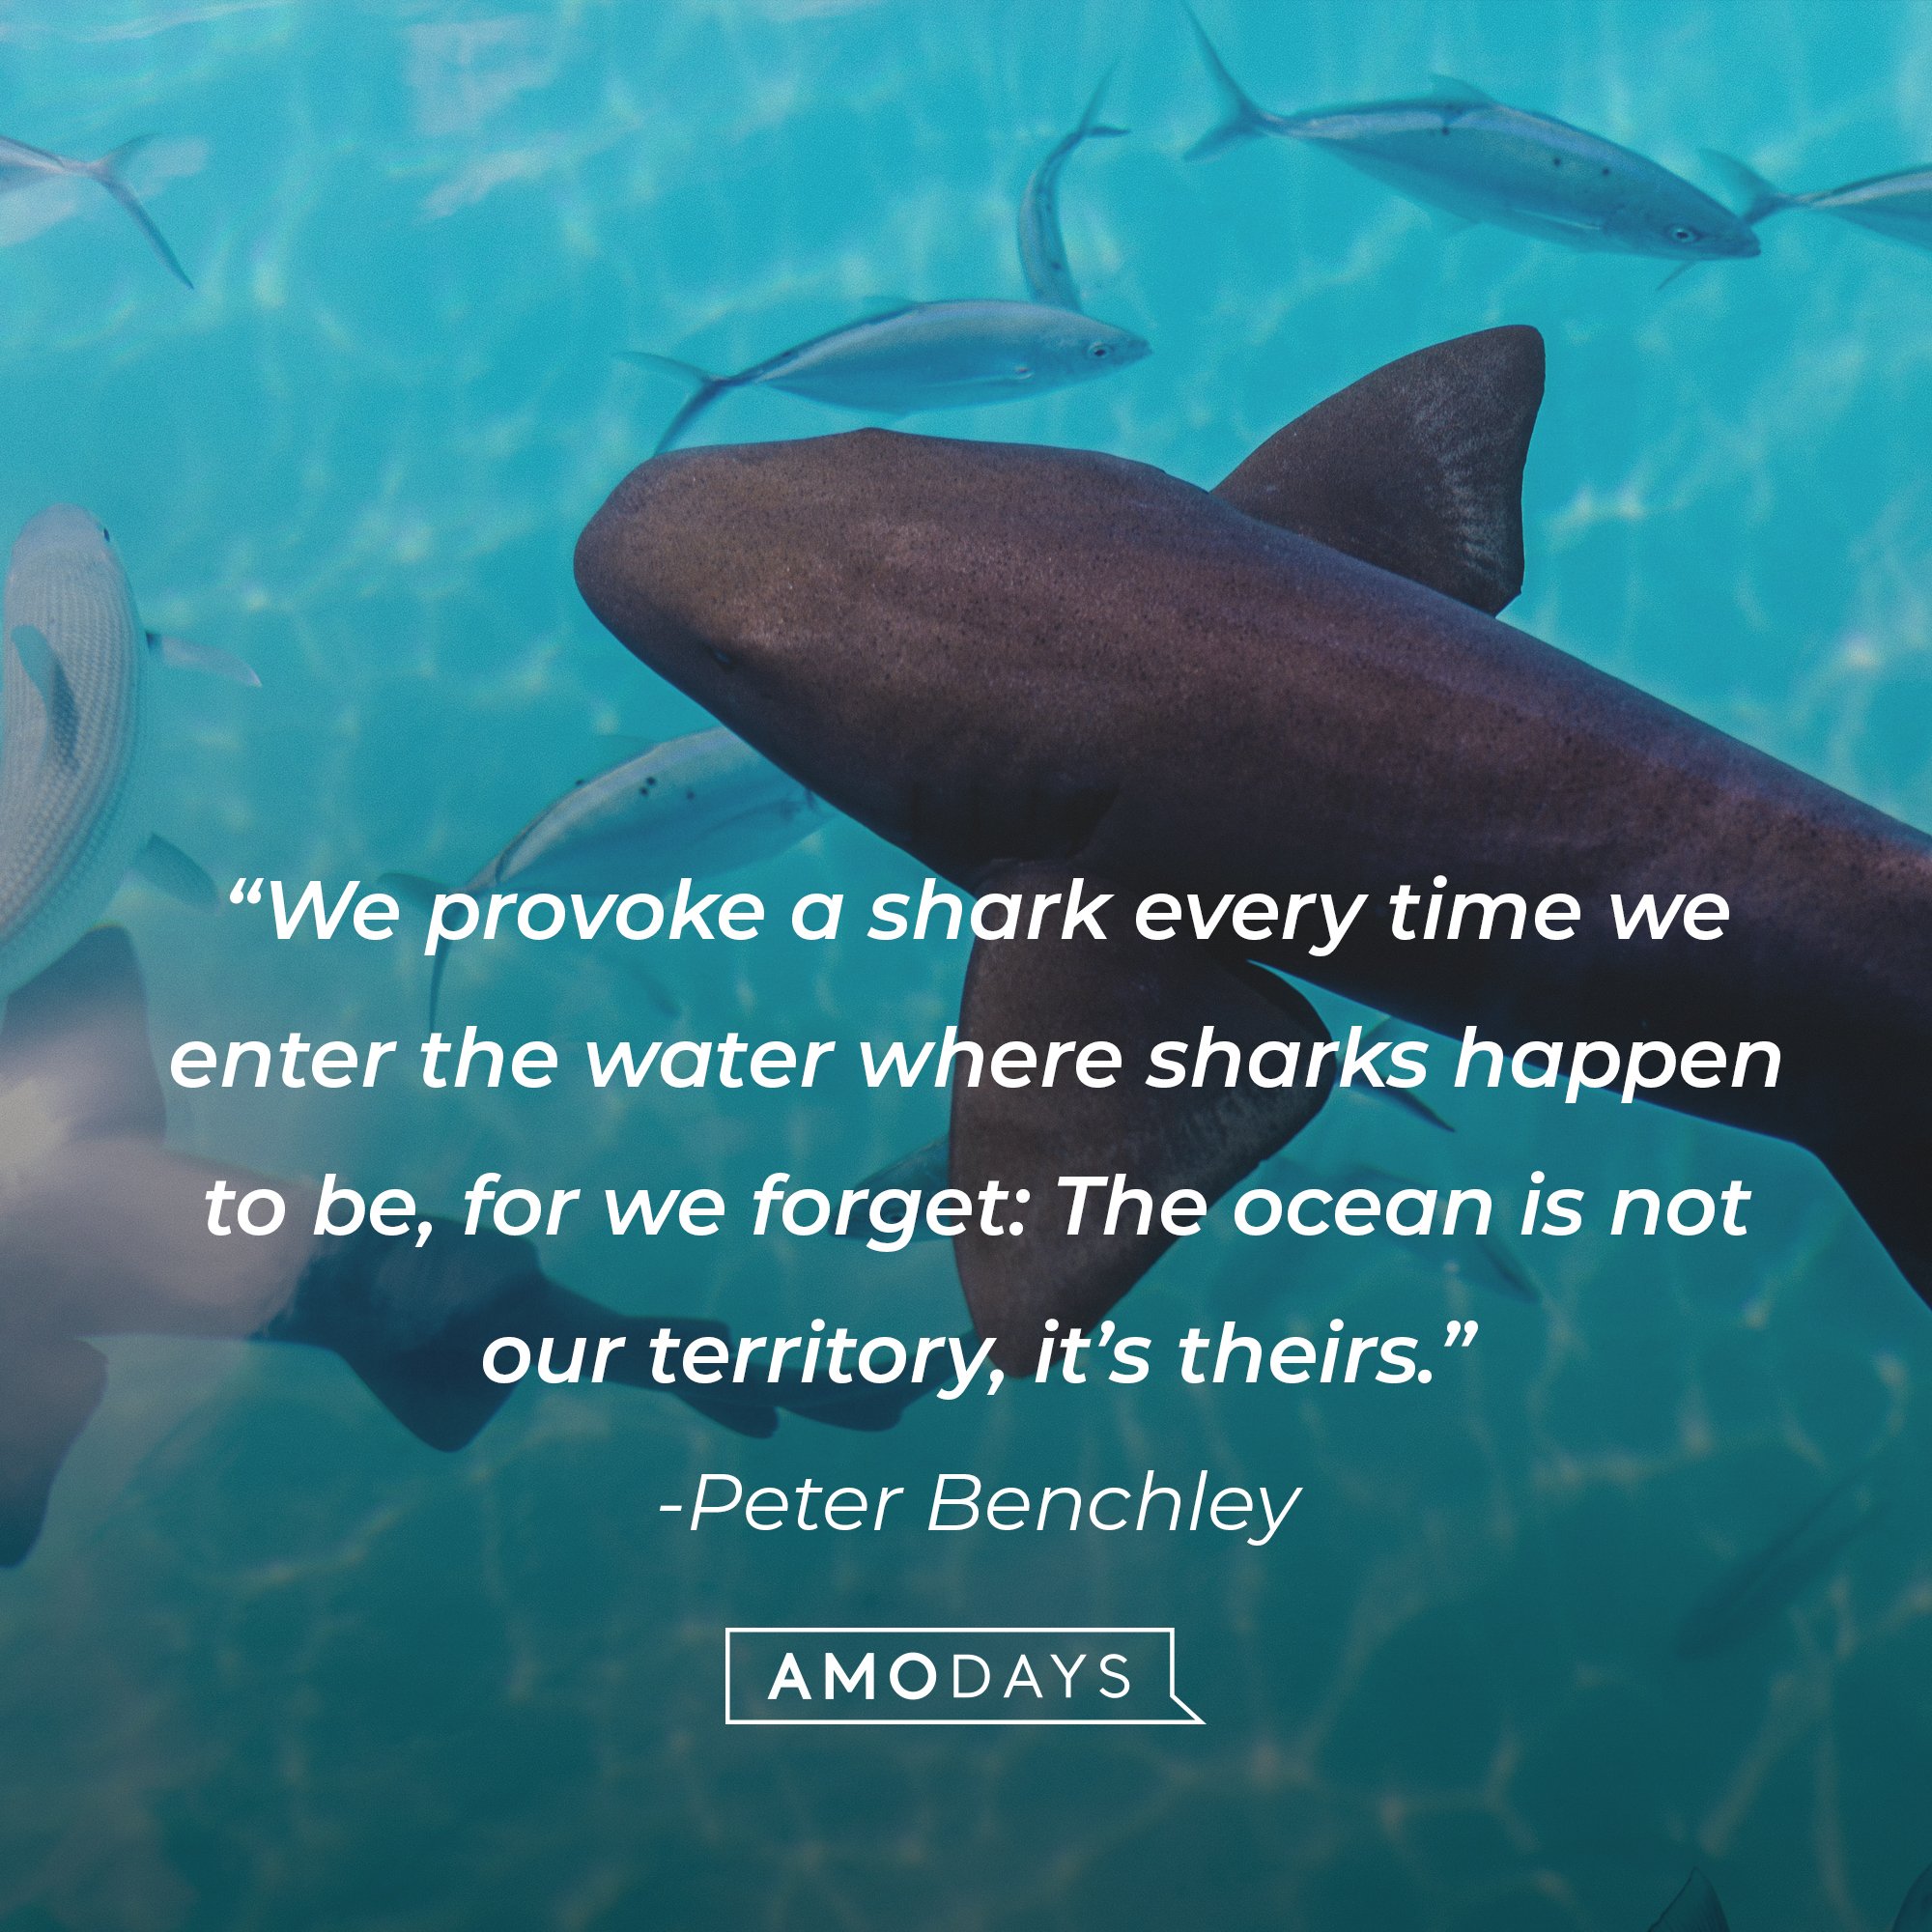 Peter Benchley's quote: “We provoke a shark every time we enter the water where sharks happen to be, for we forget: The ocean is not our territory, it’s theirs.” | Image: AmoDays